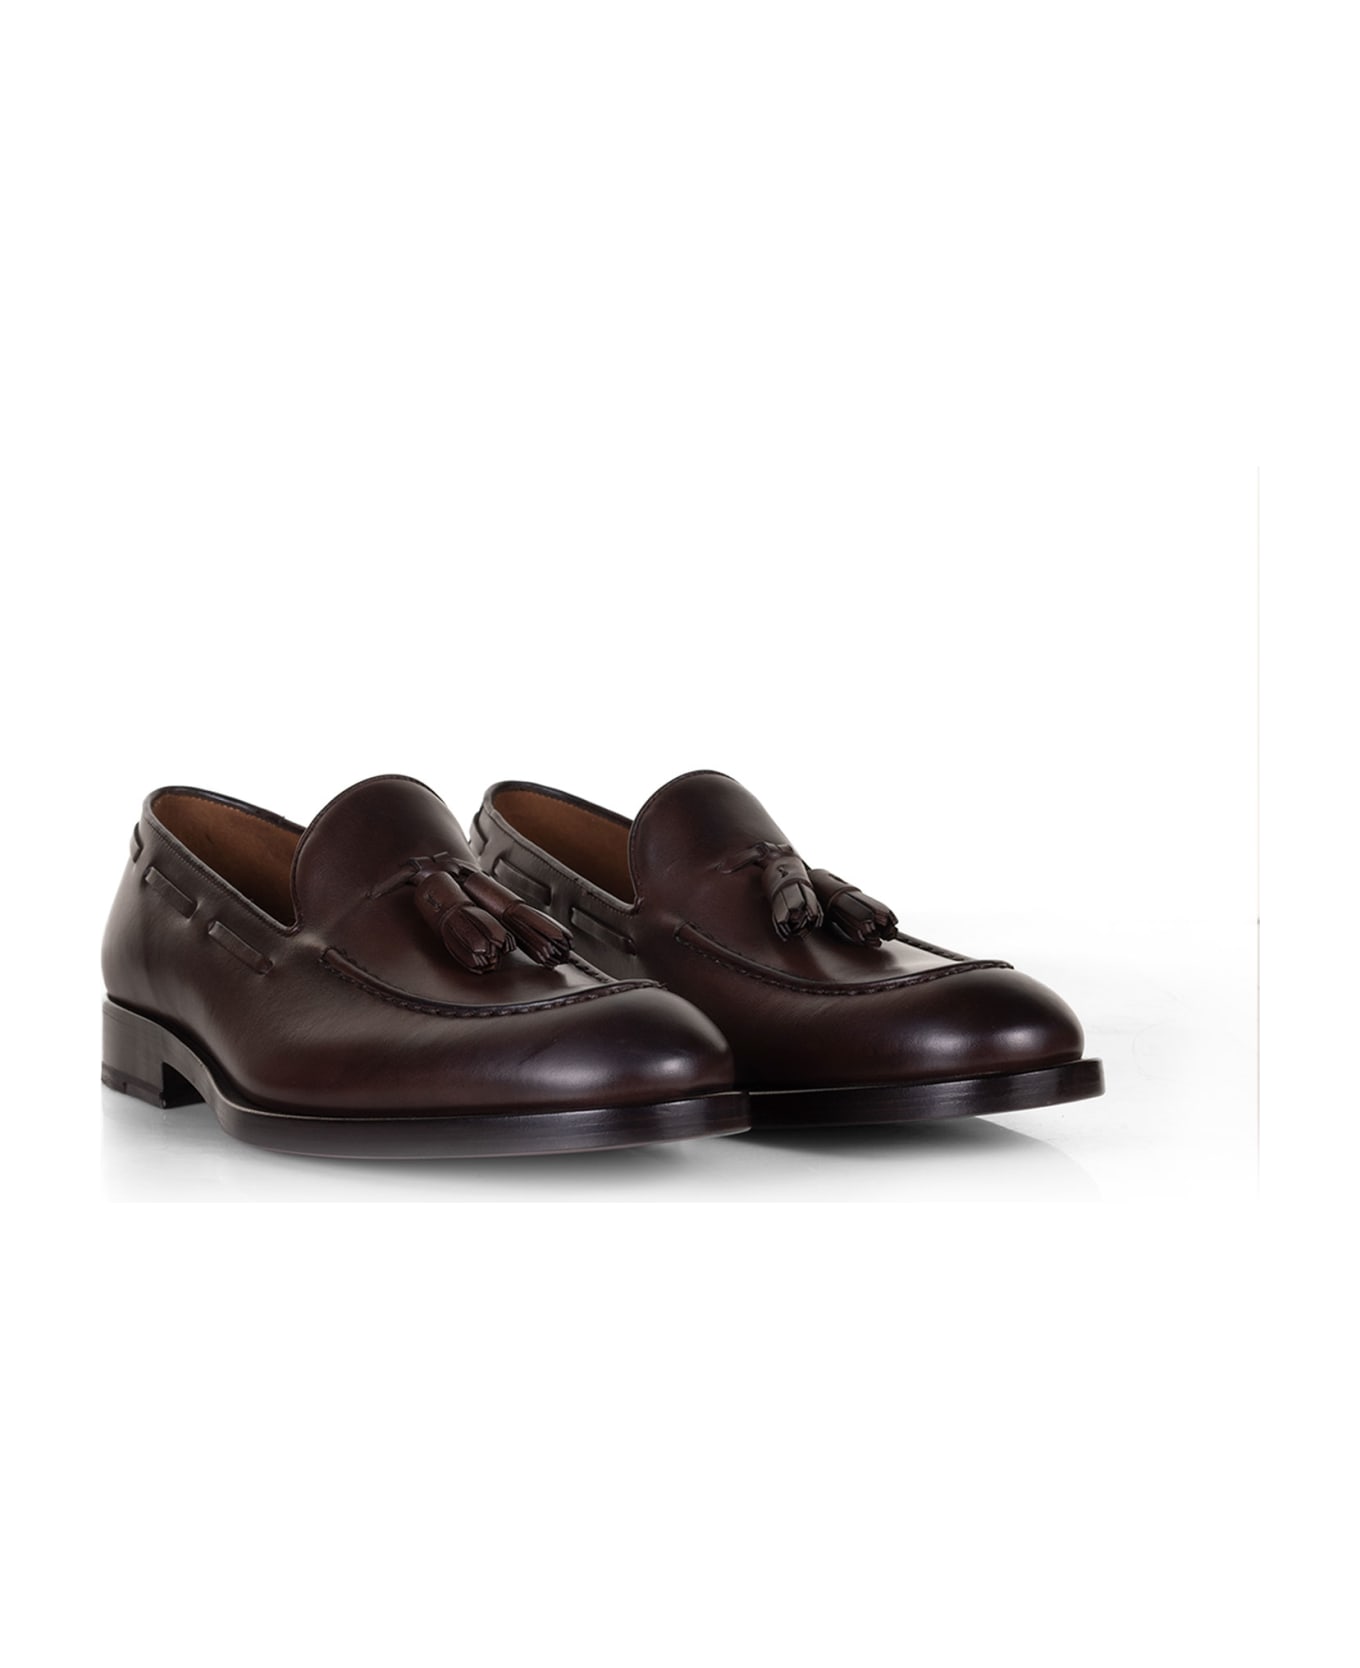 Fratelli Rossetti Leather Loafers With Tassels - MOGANO